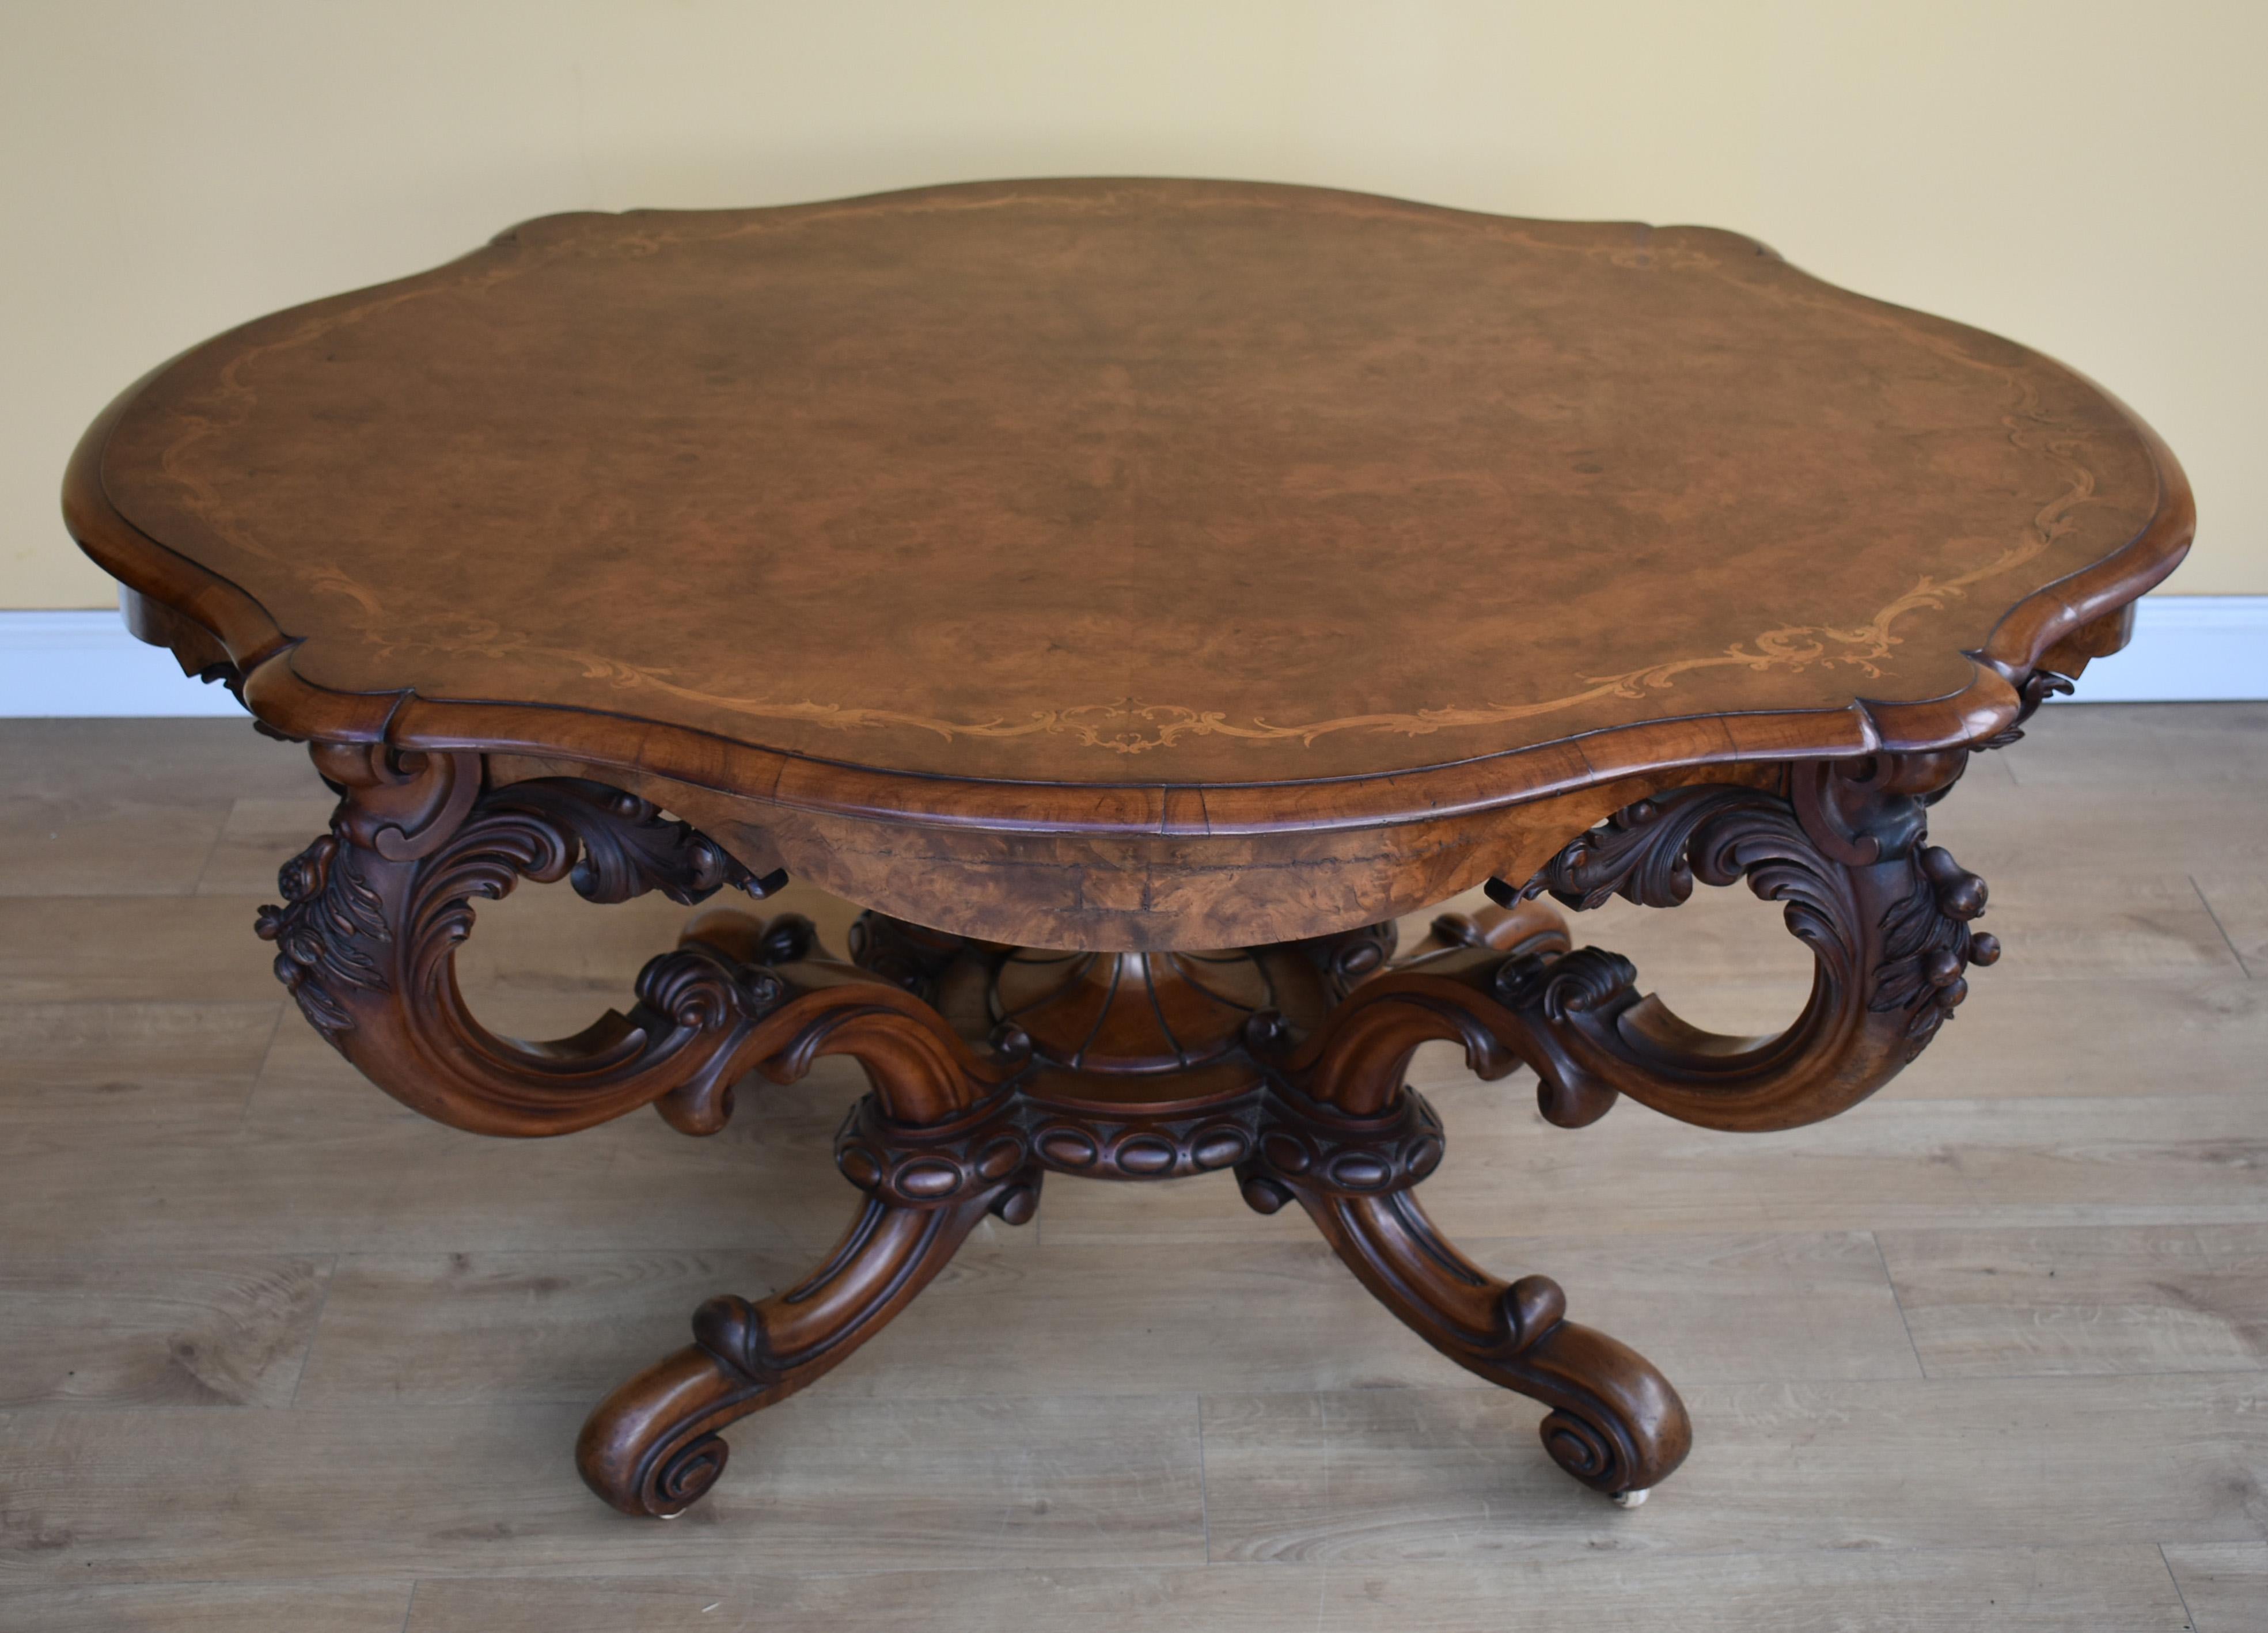 For sale is a fine quality Victorian burr walnut and marquetry inlaid table. The top is ornately shaped and has scrolling leaf inlay to the edge, this is supported by four intricately shaped and carved legs with a finial in the centre. This table is